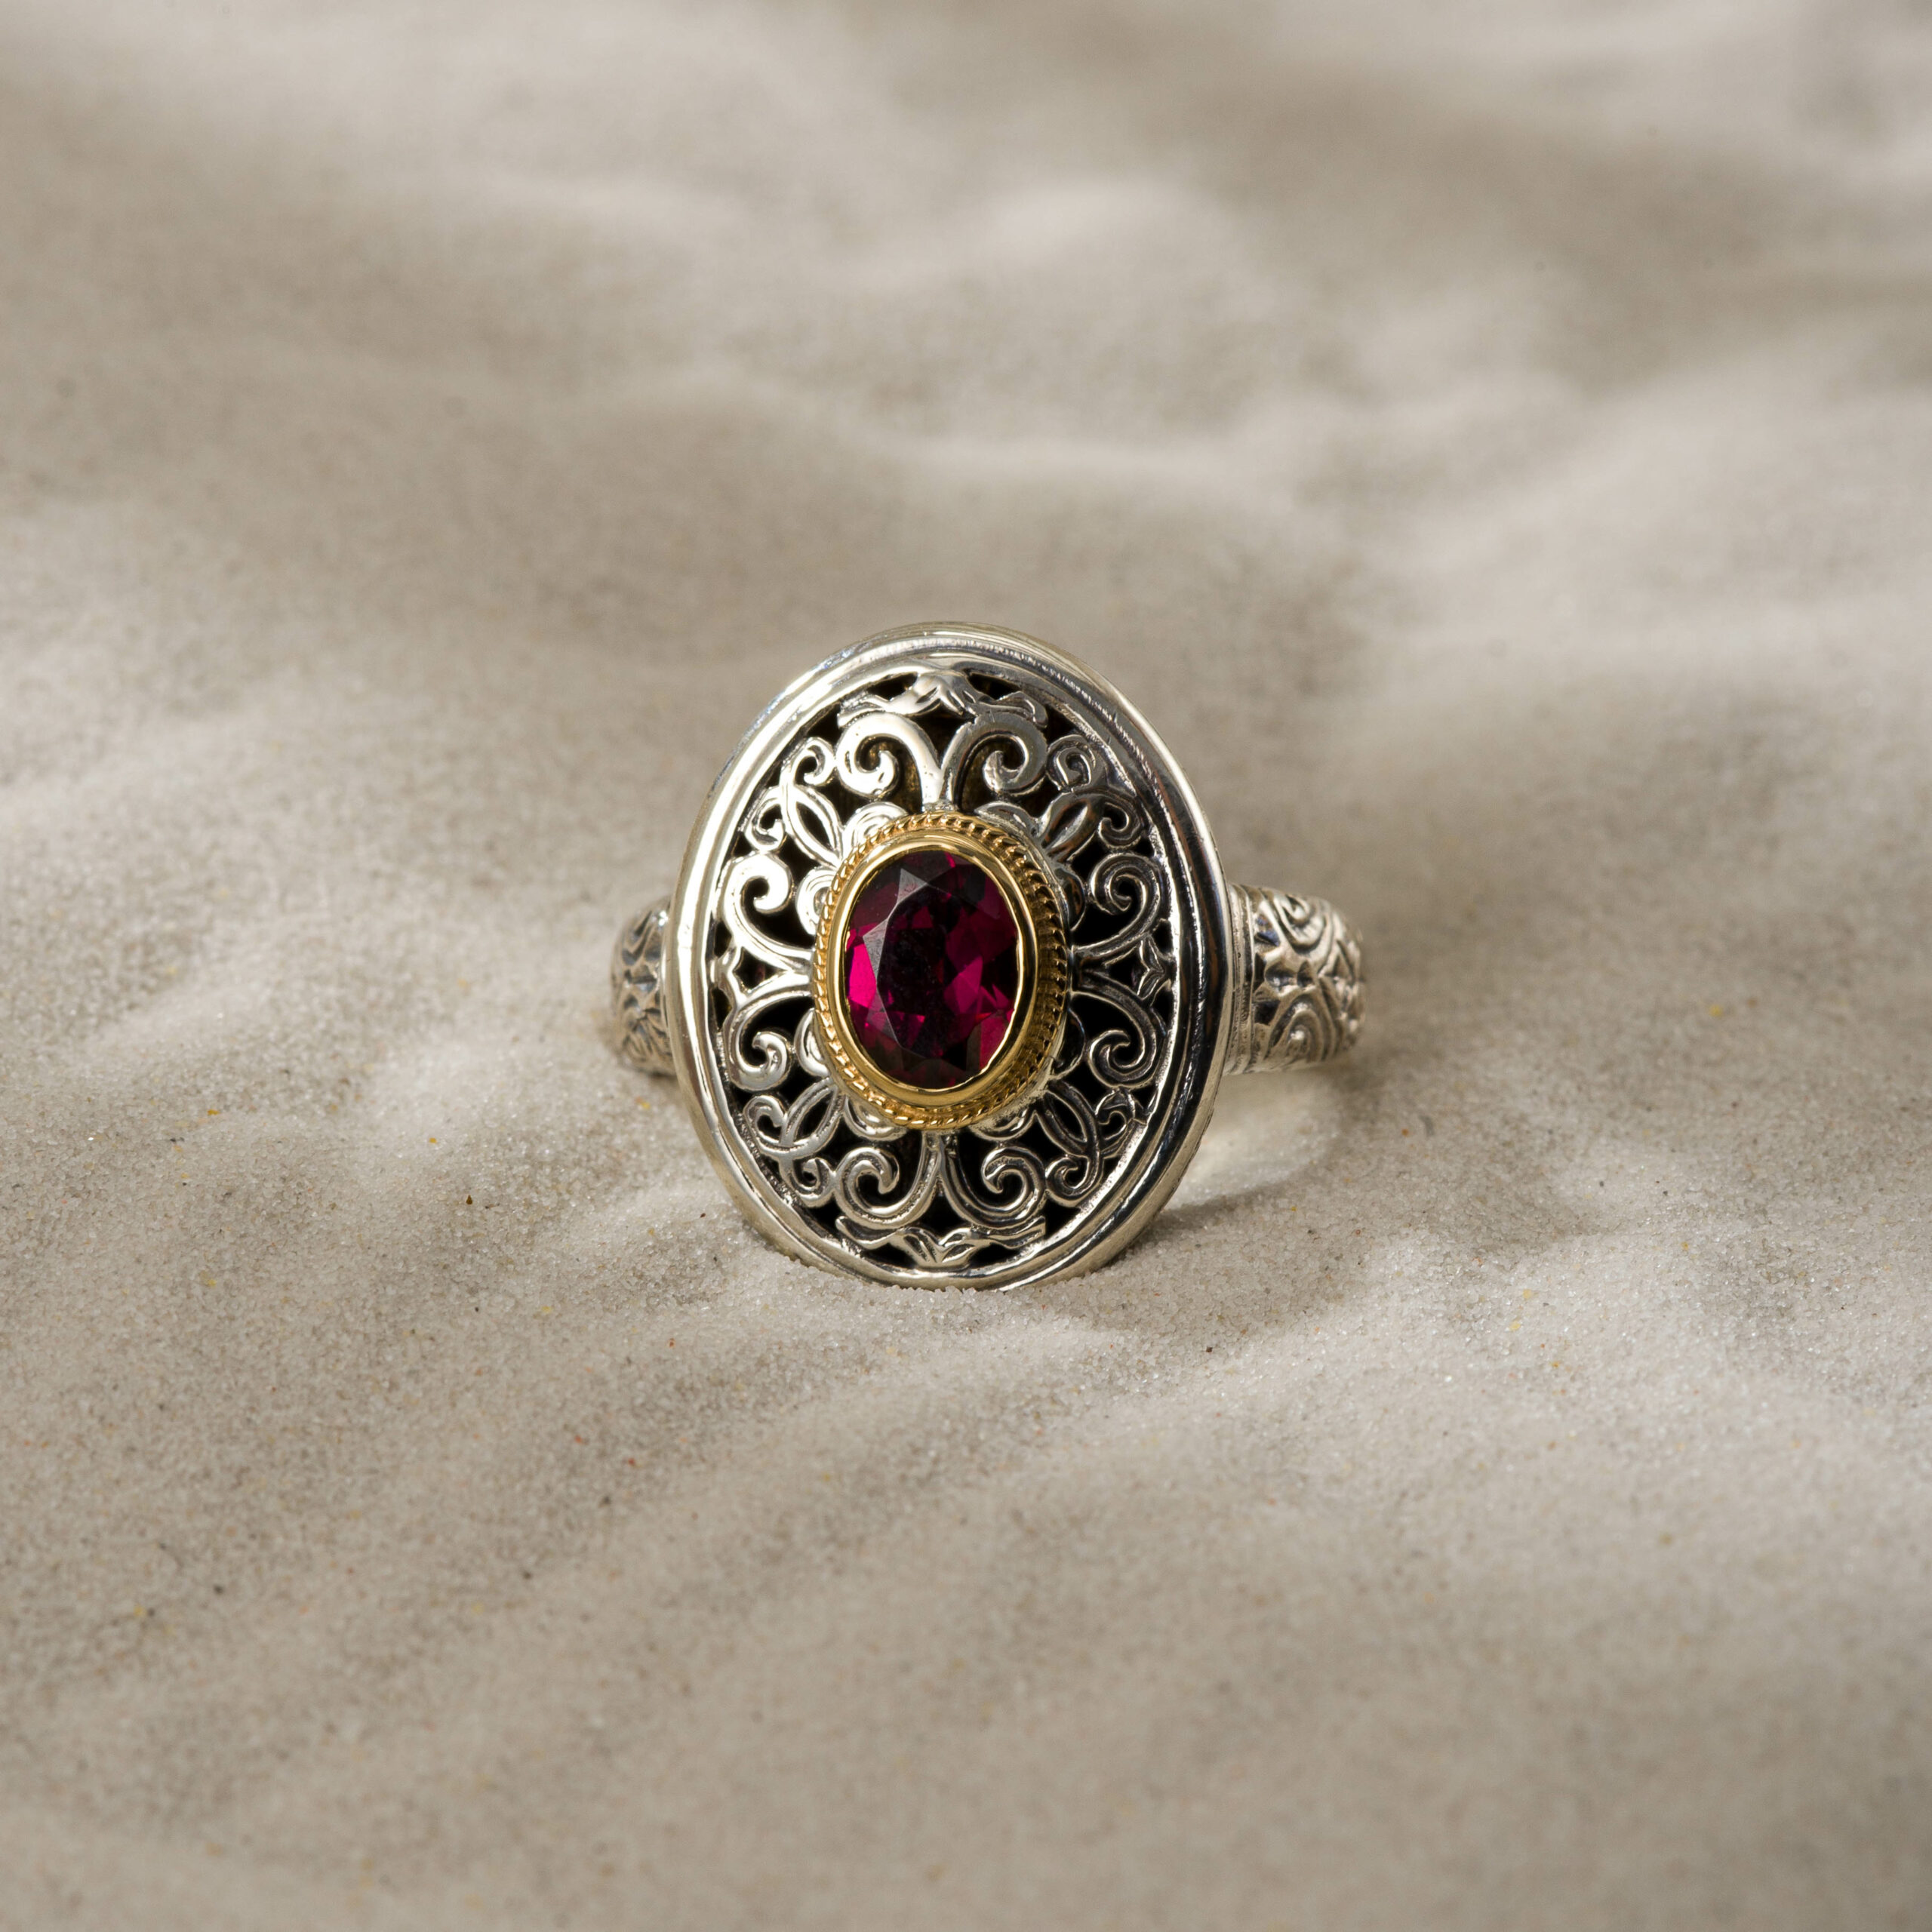 Mediterranean Oval Ring in Sterling Silver with 18K Gold details and Rhodolite